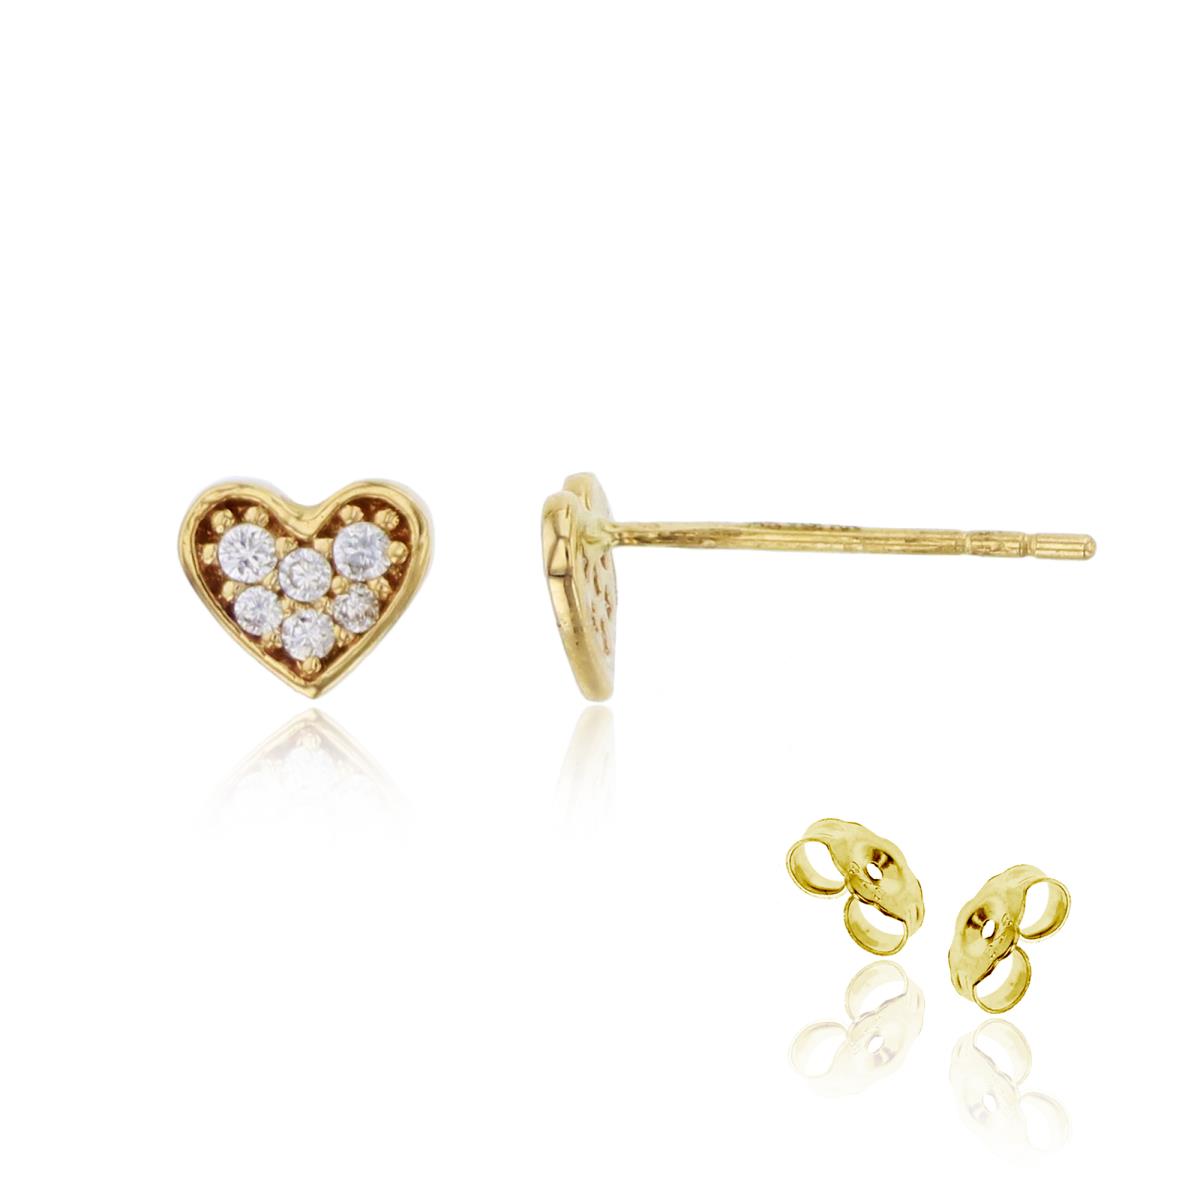 10K Yellow Gold Paved Heart Stud Earring with 4.5mm Clutch